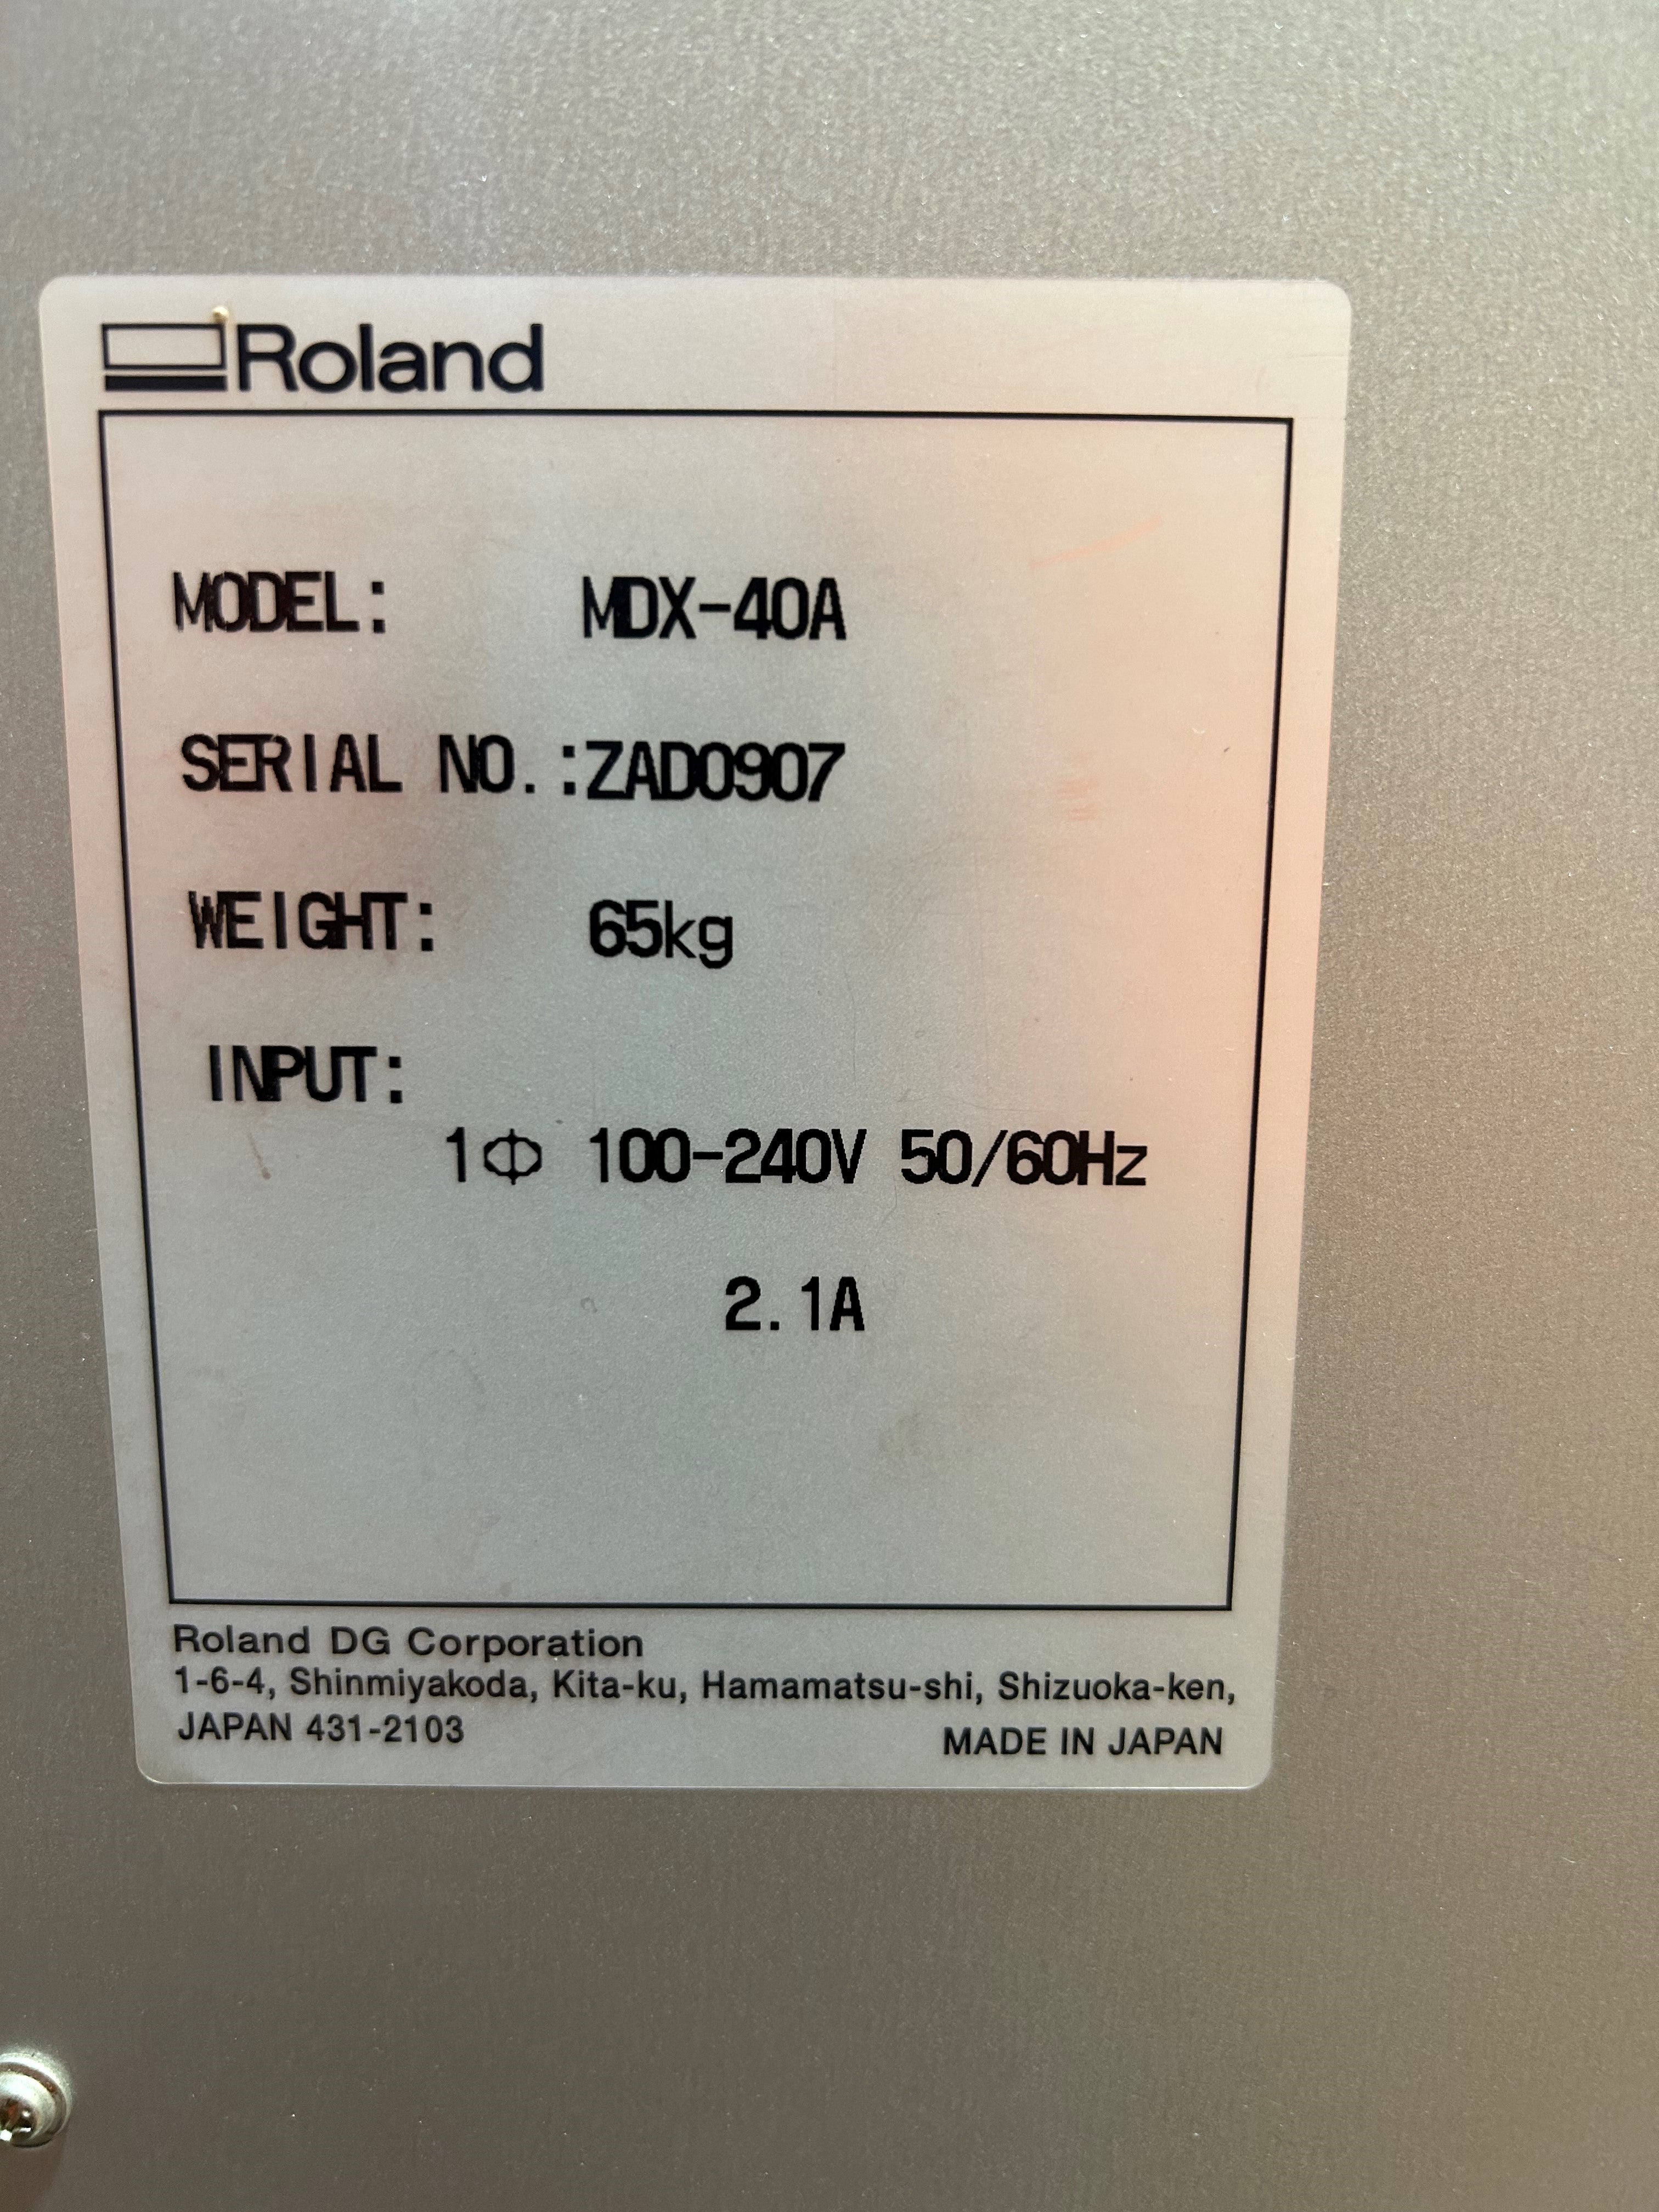 *Pre Loved* CNC Router With Rotary Axis - MDX-40A by Roland